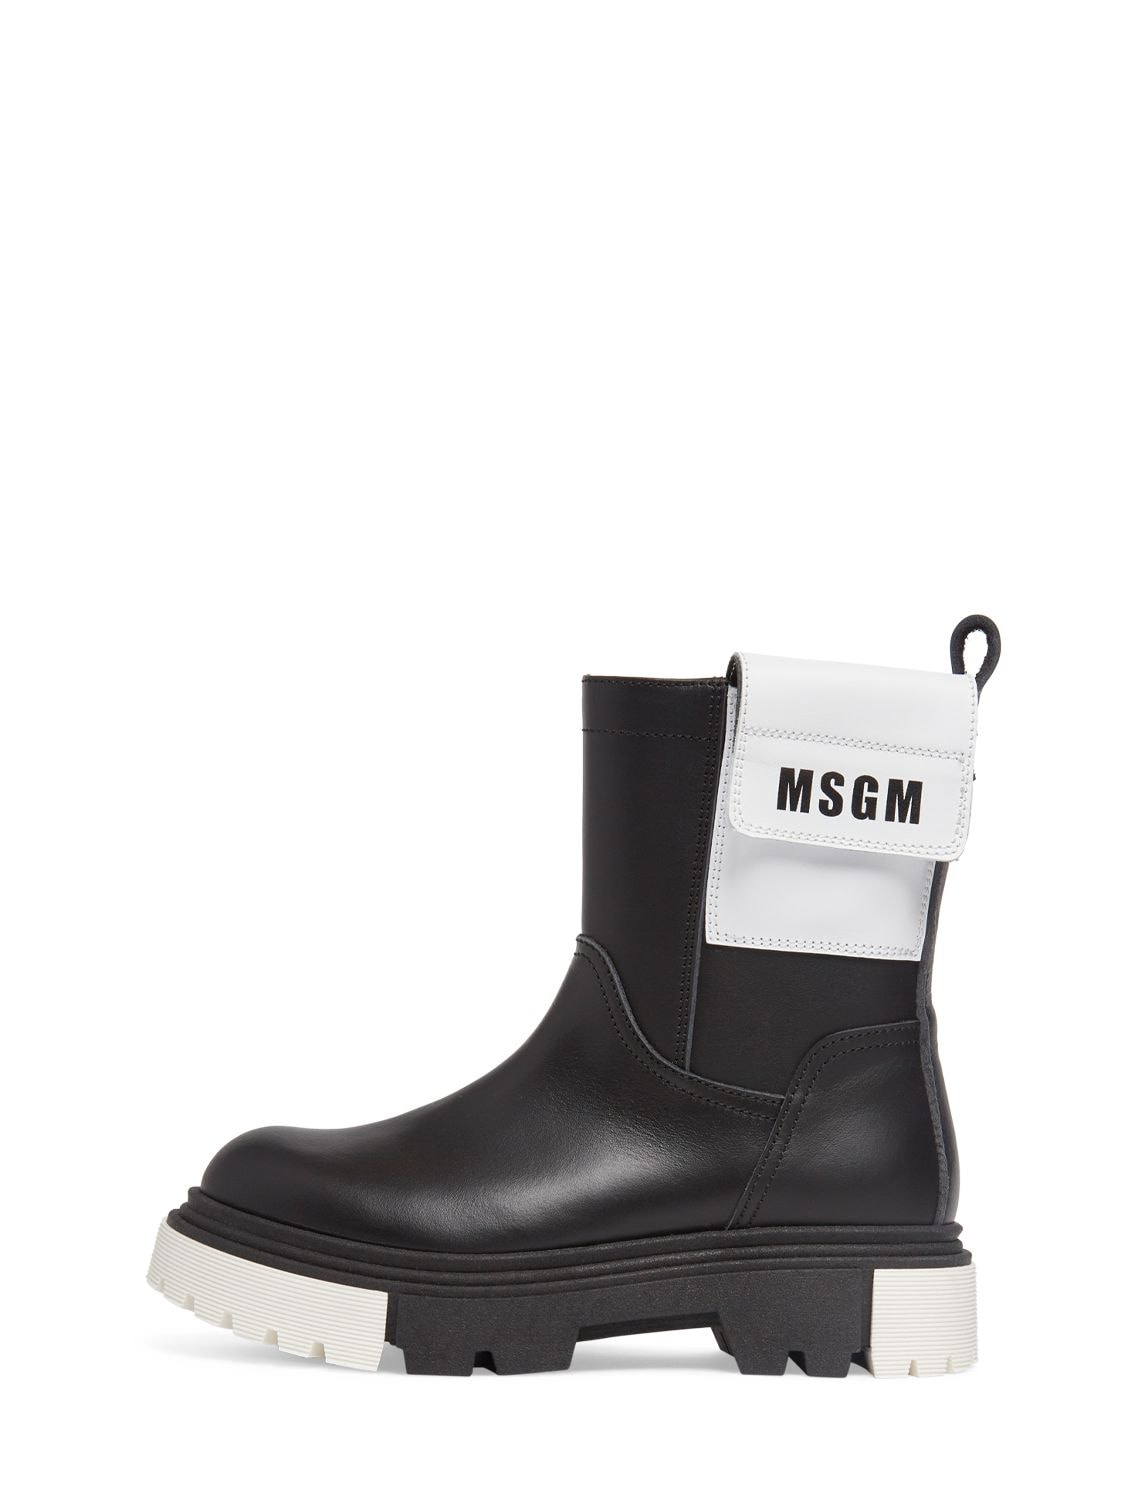 Msgm Kids' Leather High Boots W/logo Pocket In Black